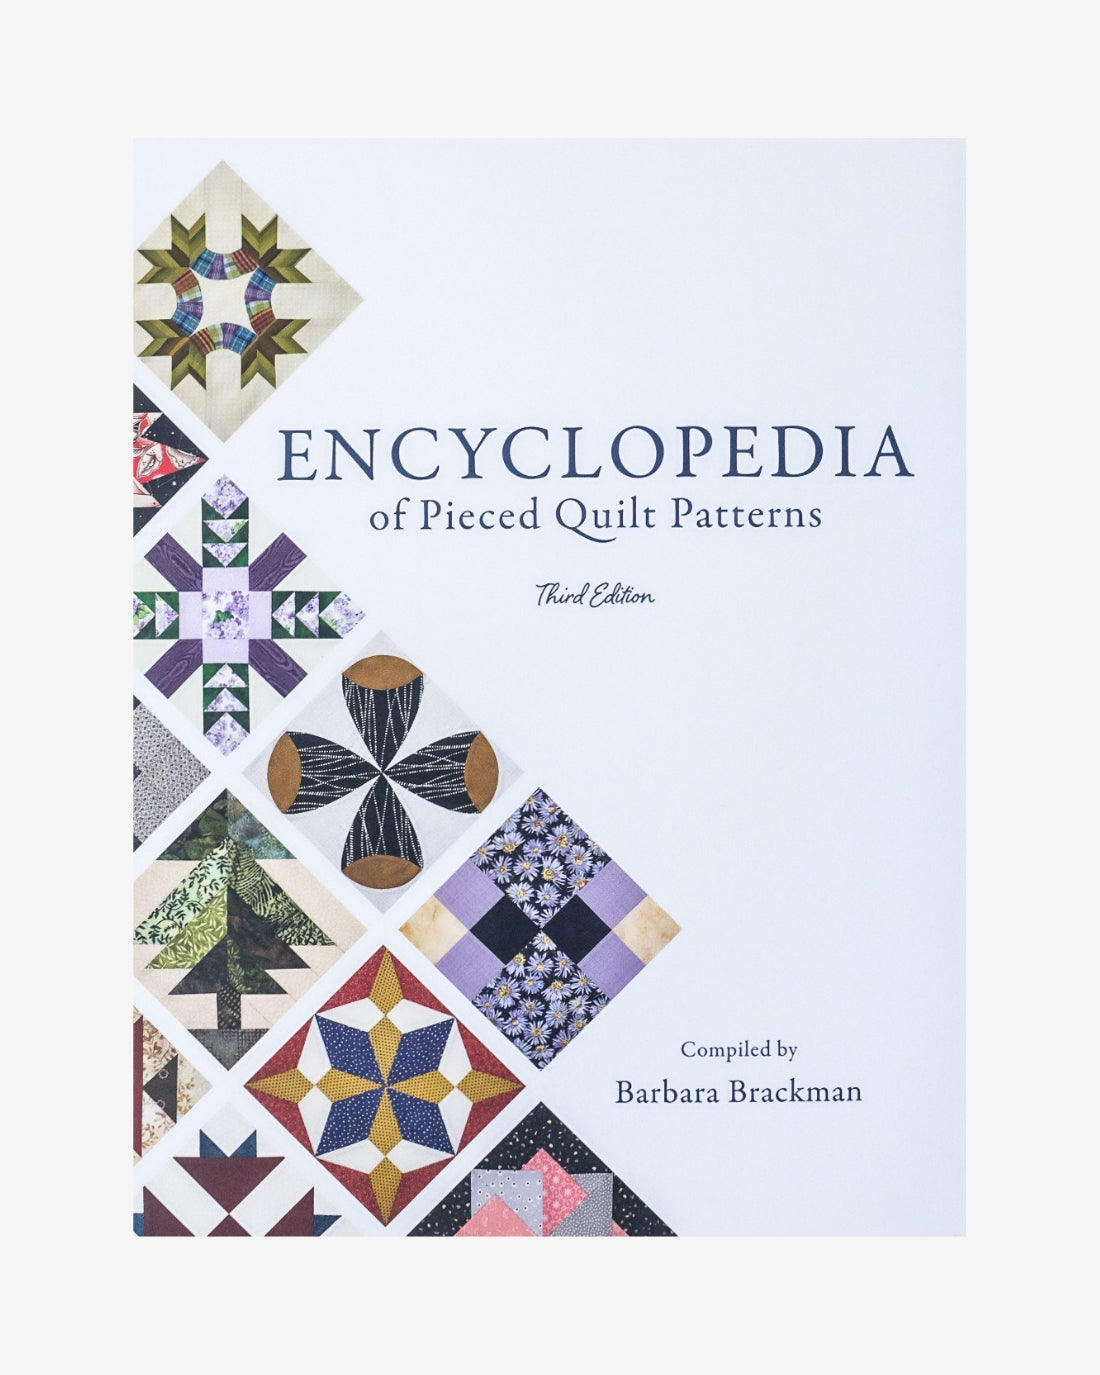 The Encyclopedia of Pieced Quilt Patterns by Barbara Brackman